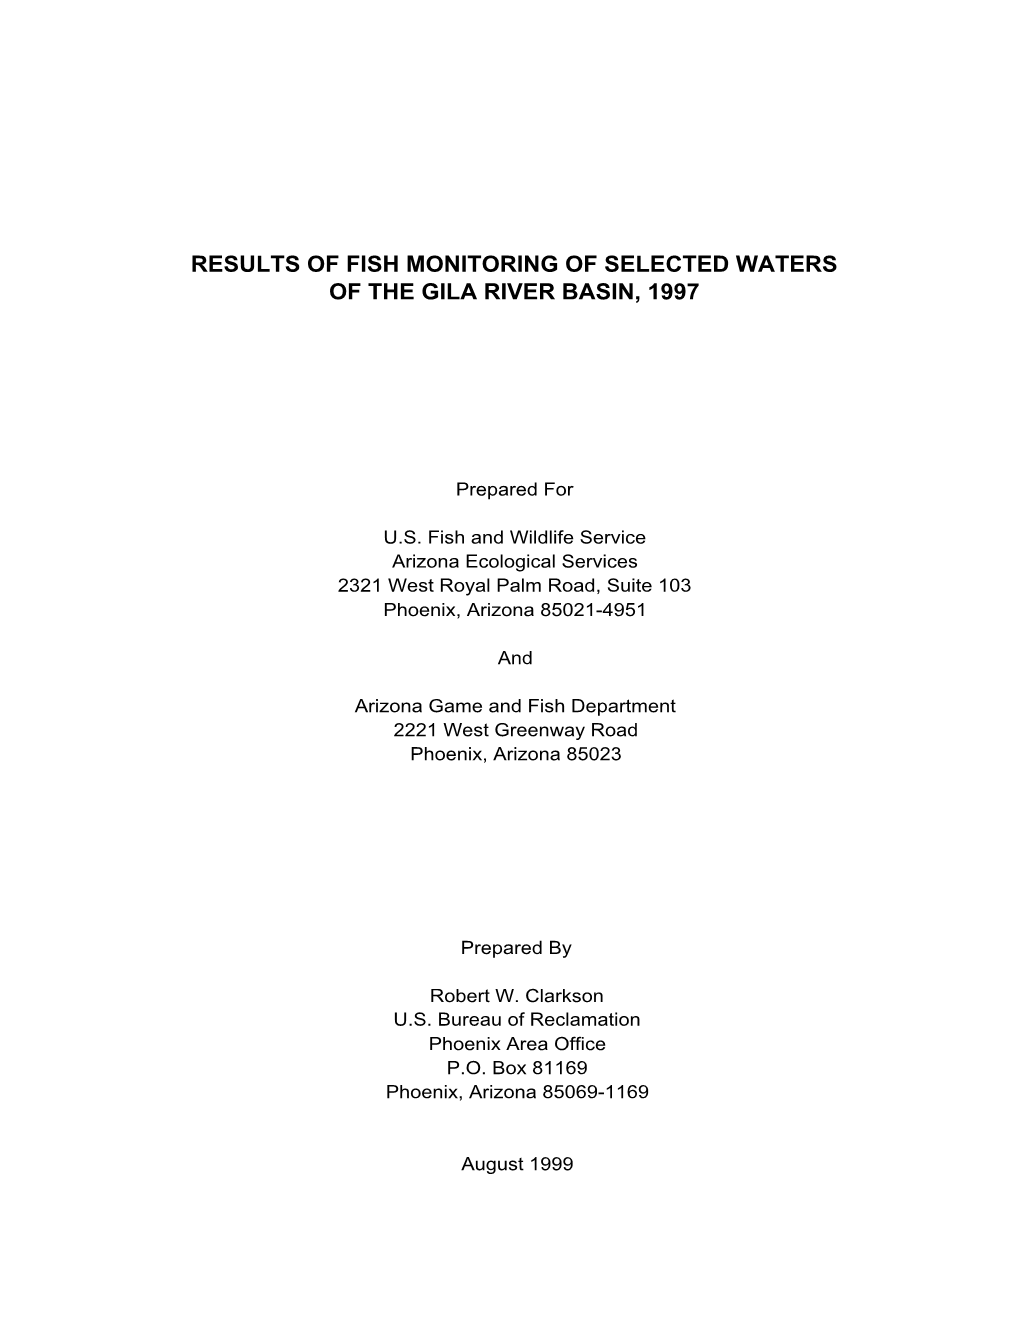 Results of Fish Monitoring of Selected Waters of the Gila River Basin, 1997